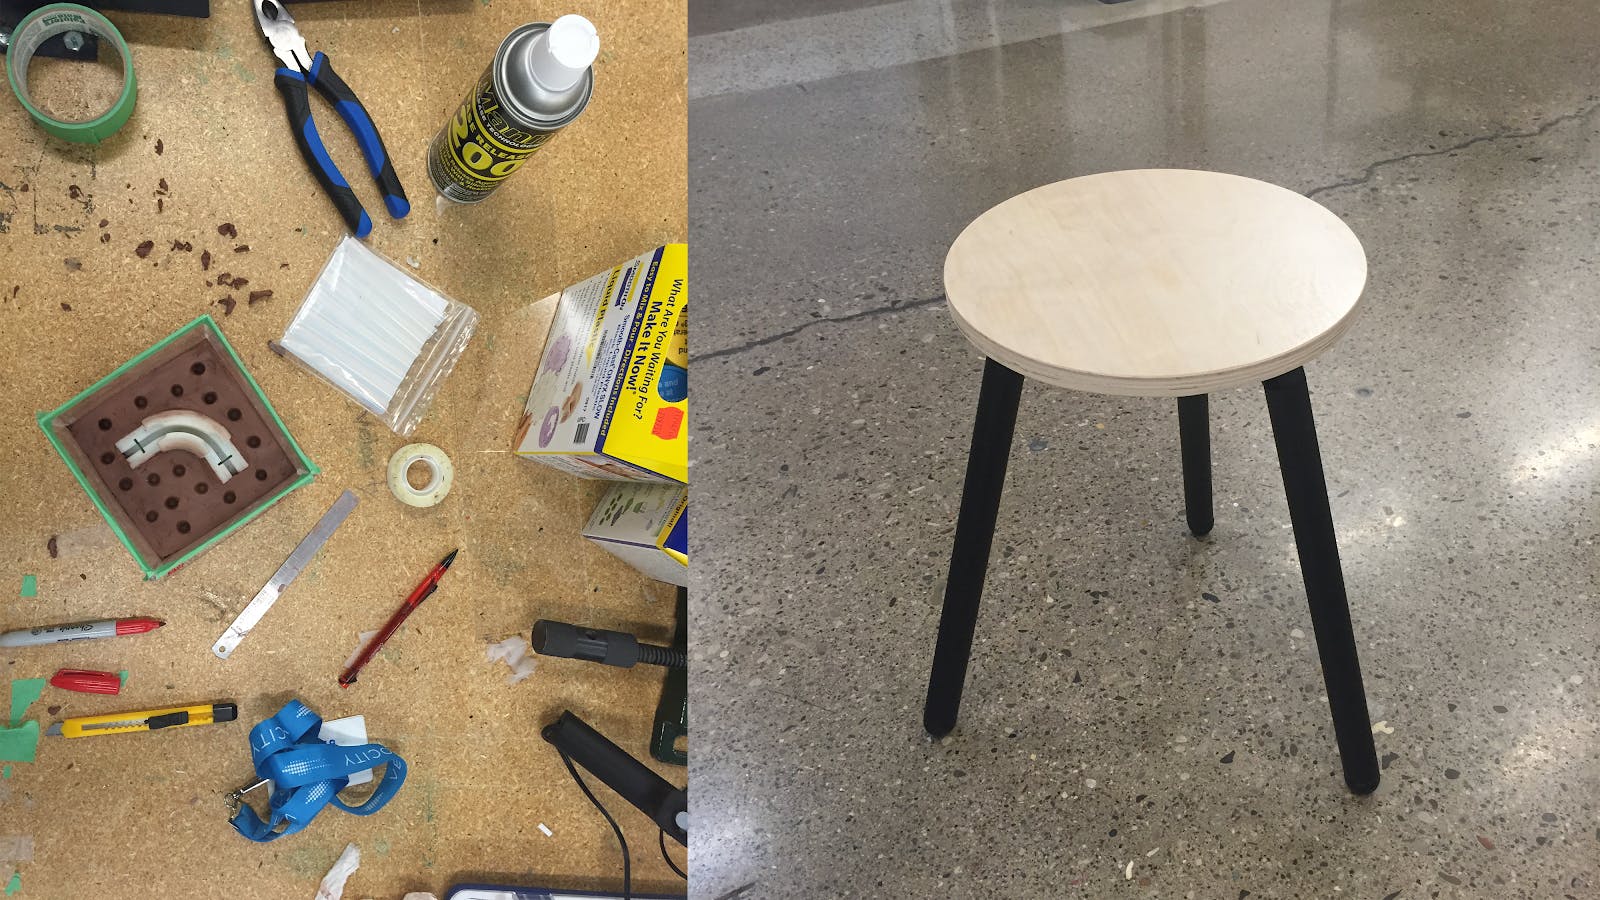 Left: Using epoxy resin to duplicate 3D-printed parts. Right: A simple plywood stool using our connectors to form the legs. It couldn’t carry significant weight, but it worked as a proof of concept.